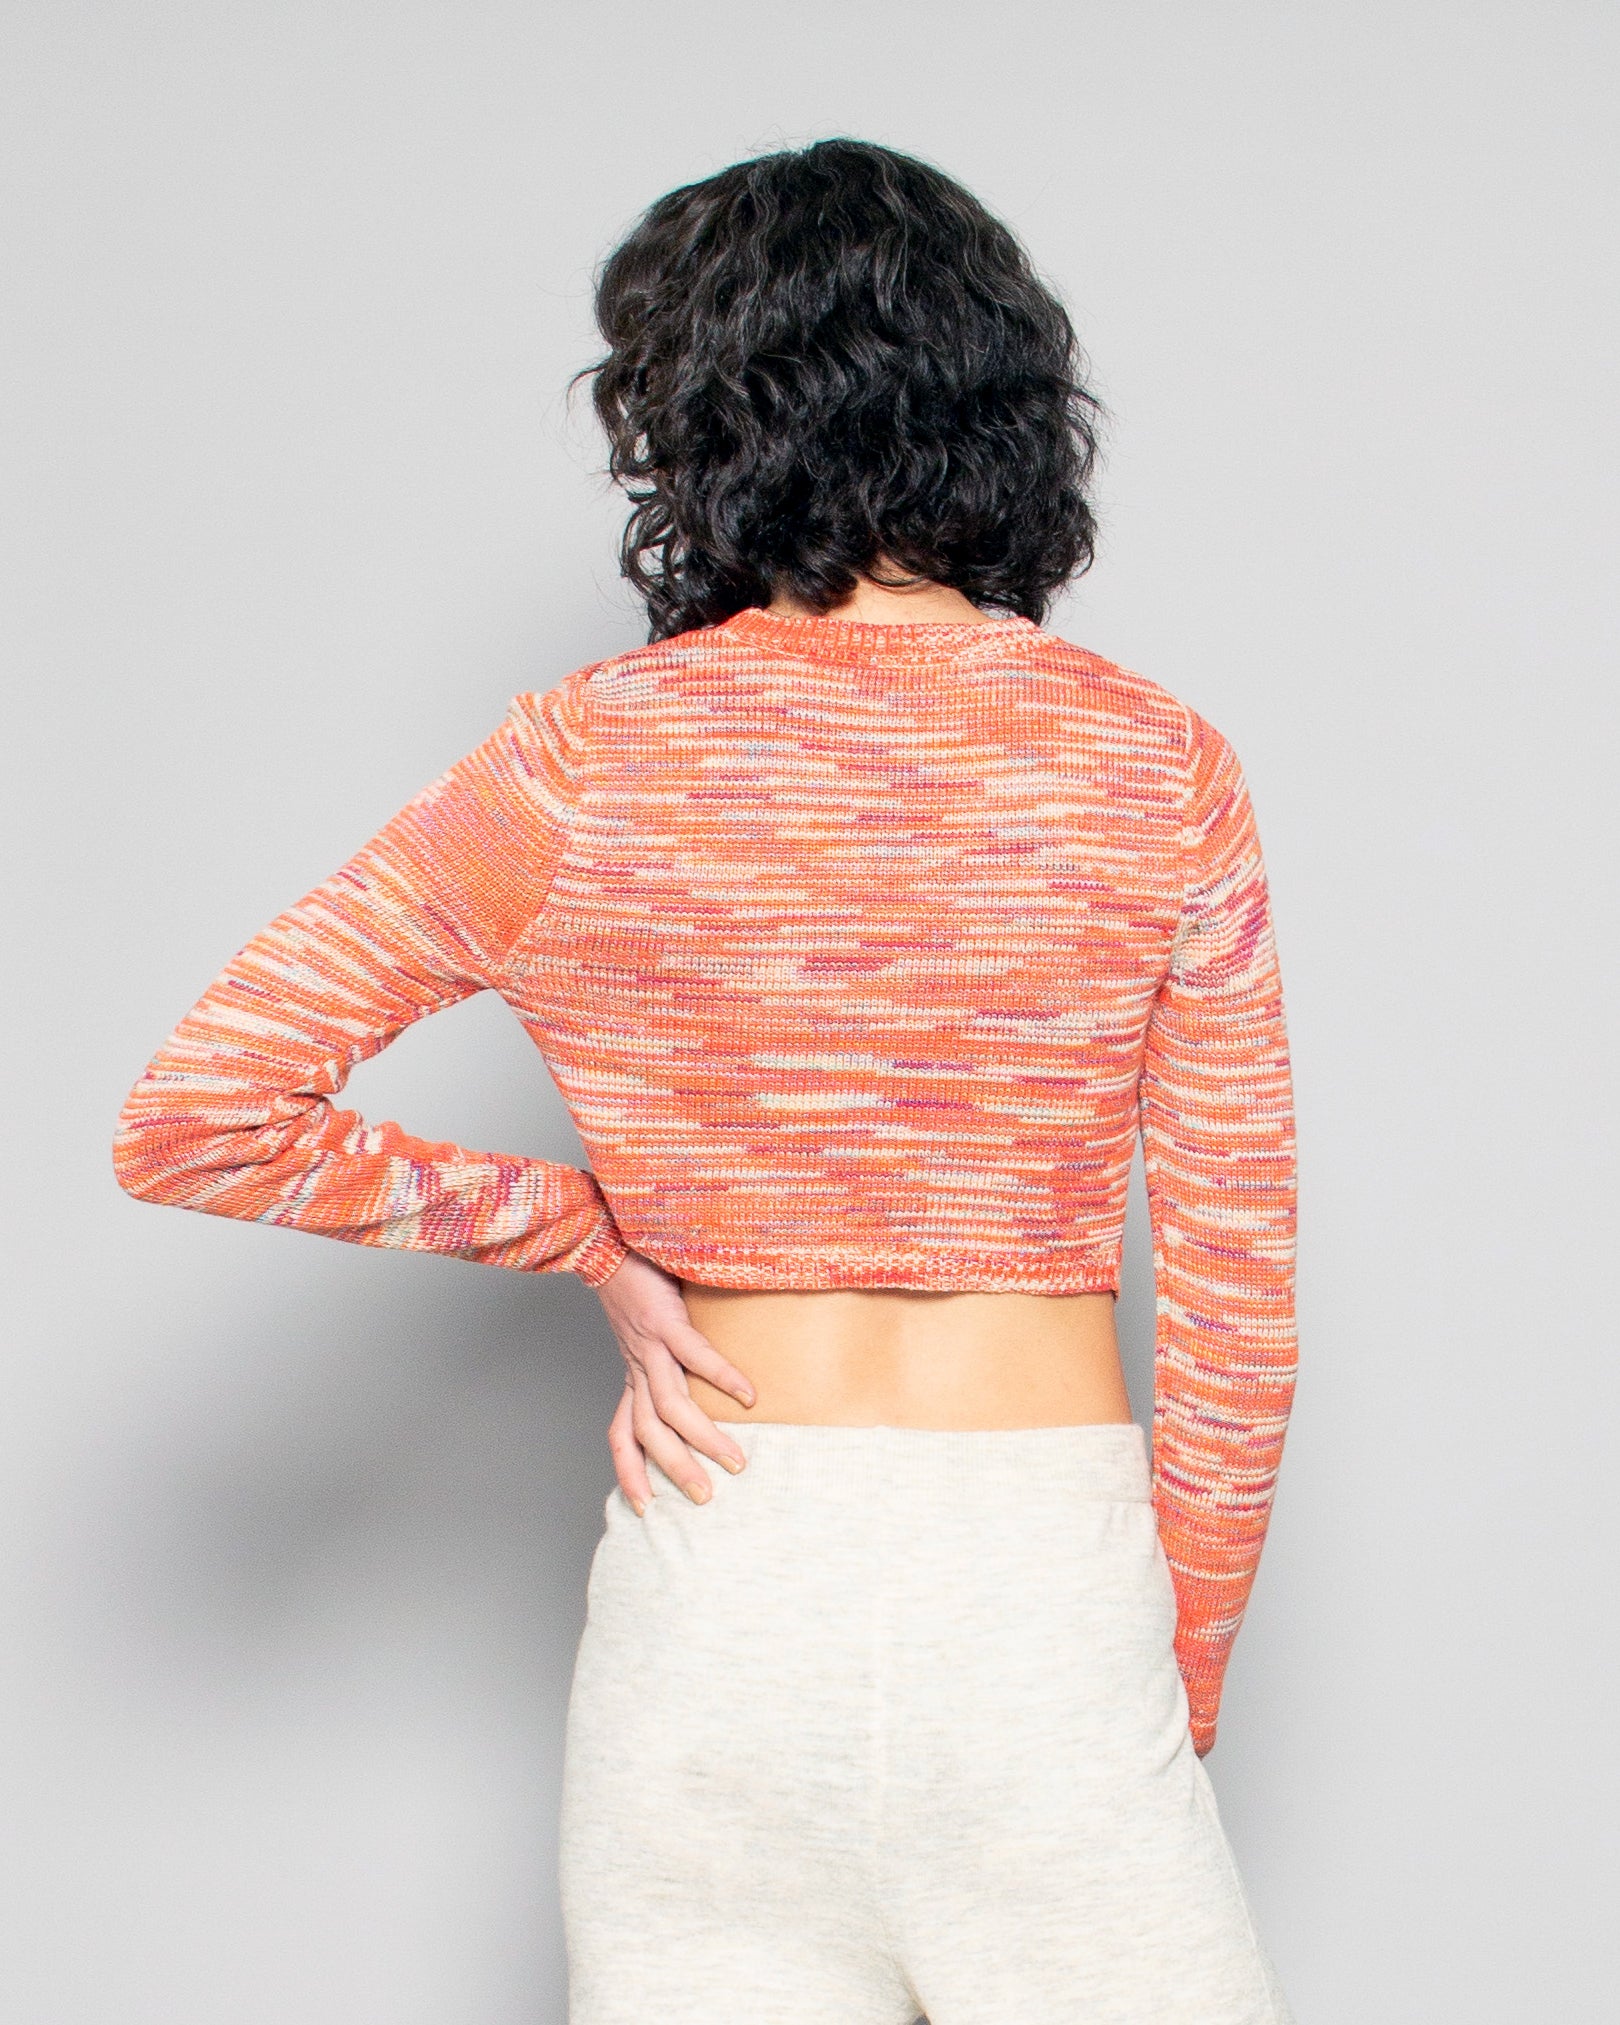 PERSONS Wess Split Front Crop Top in Creamsicle available at Lahn.shop